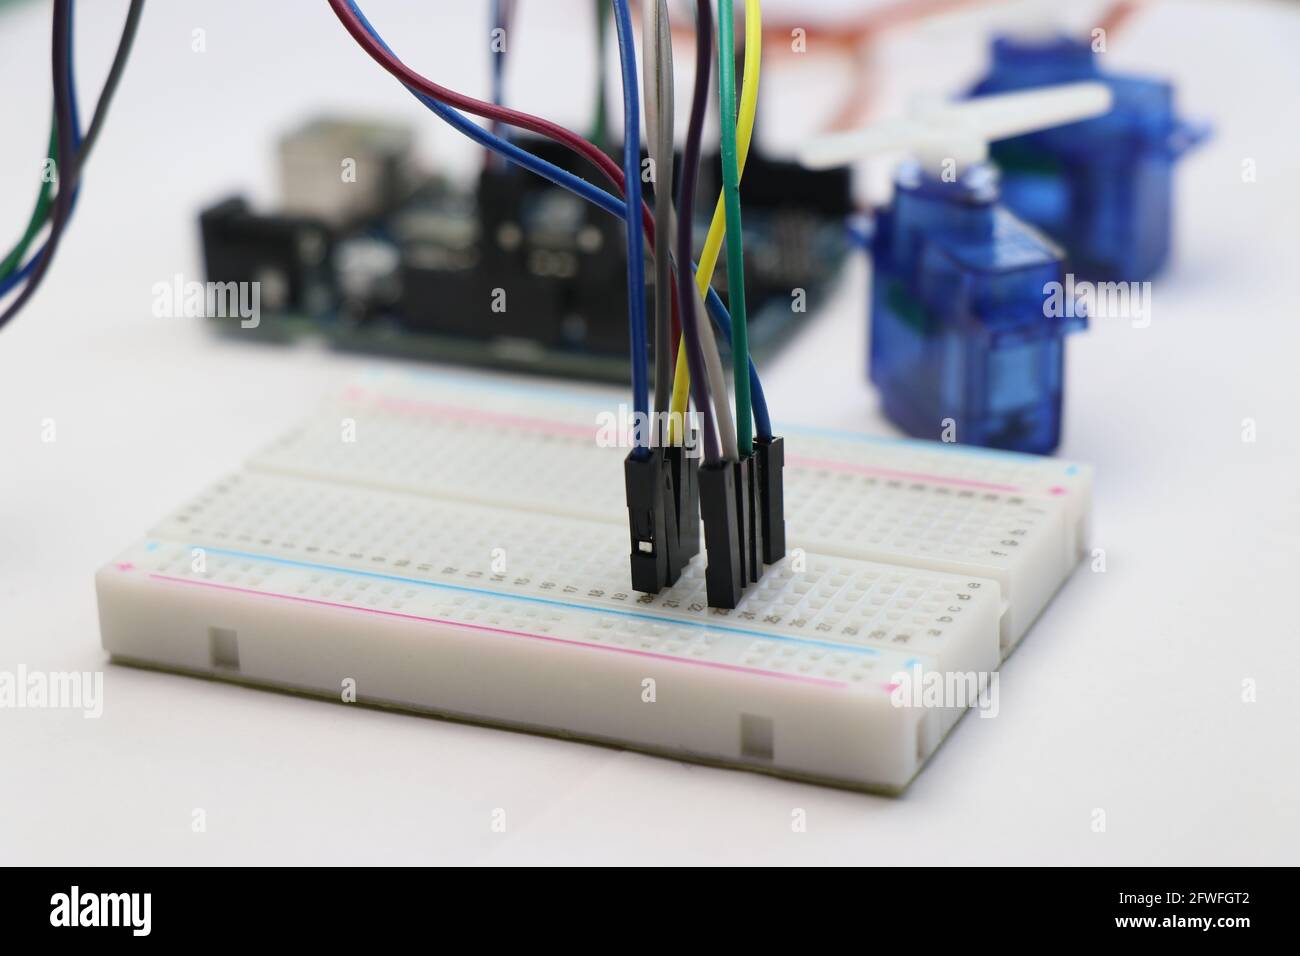 Breadboard with jumper wires connected along with arduino uno and micro servo on background. Arduino project concept Stock Photo